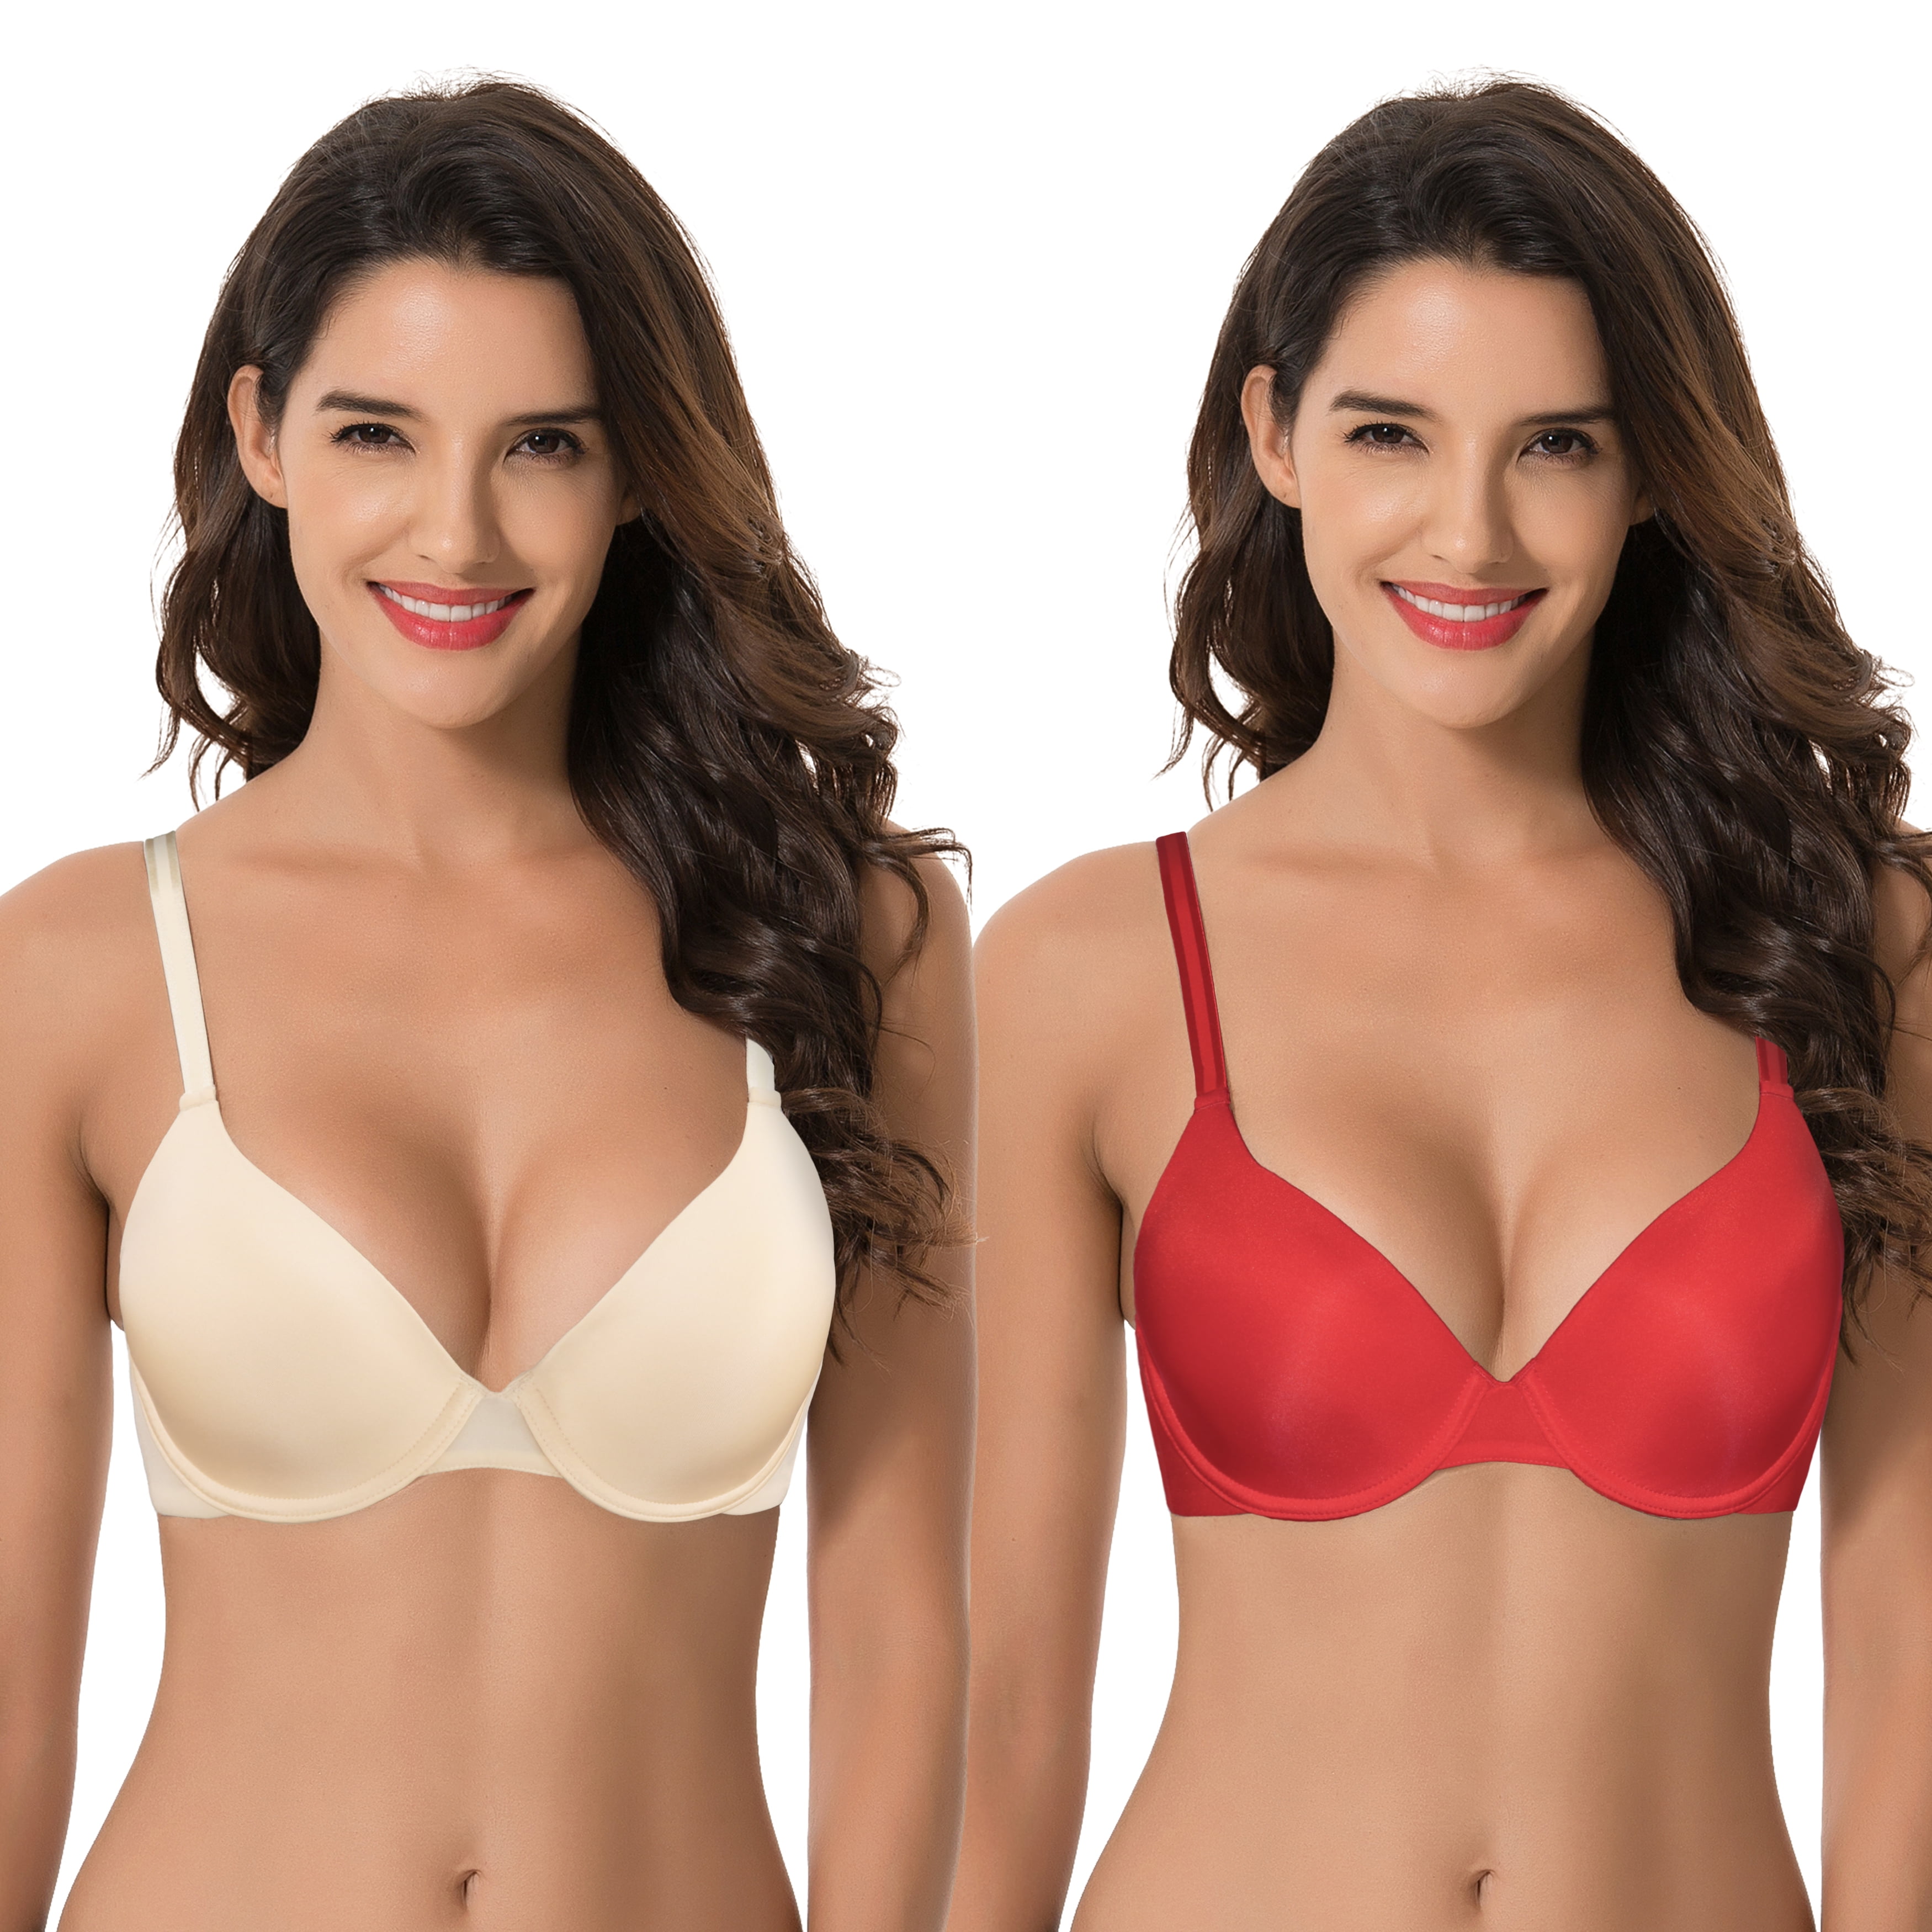 Curve Muse Women's Plus Size Full Coverage Padded Underwire Bra-2PK -NUDE,RED-32DD 